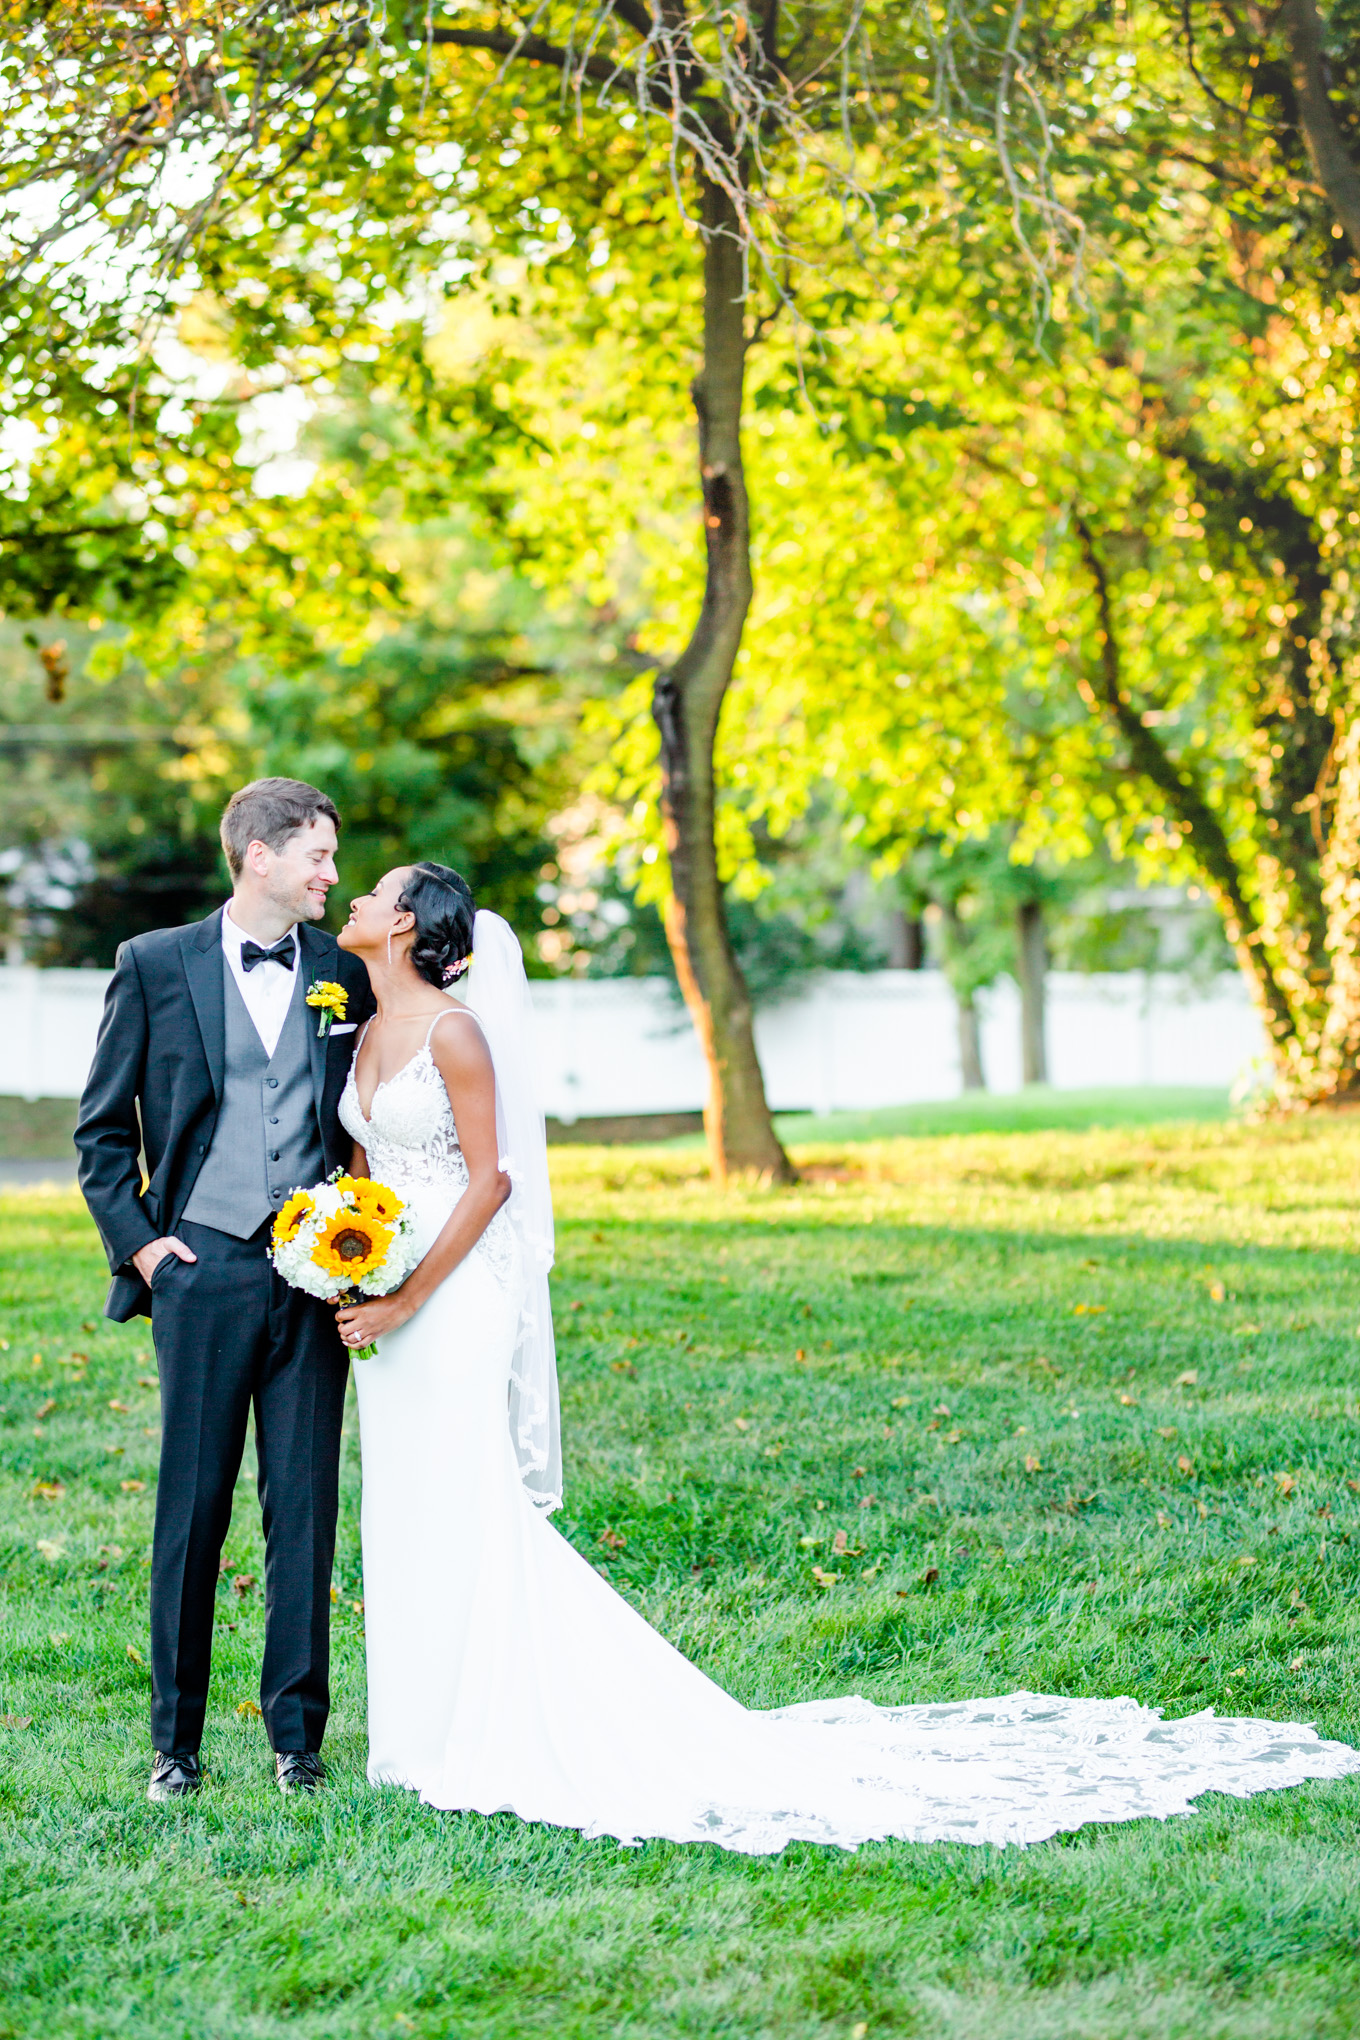 summer mansion at valley country club wedding, Maryland wedding, MD wedding, Maryland wedding photographer, summer wedding, summer wedding inspiration, Baltimore wedding photographer, DC wedding photographer, country club wedding, yellow aesthetic, Rachel E.H. Photography, golden hour portraits